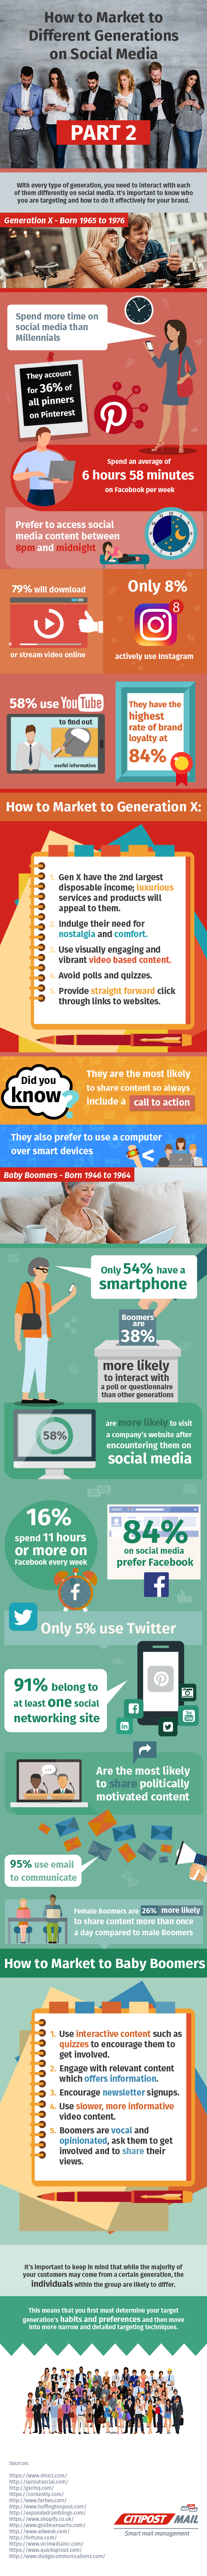 How to Market to Generations Infographic Part 2